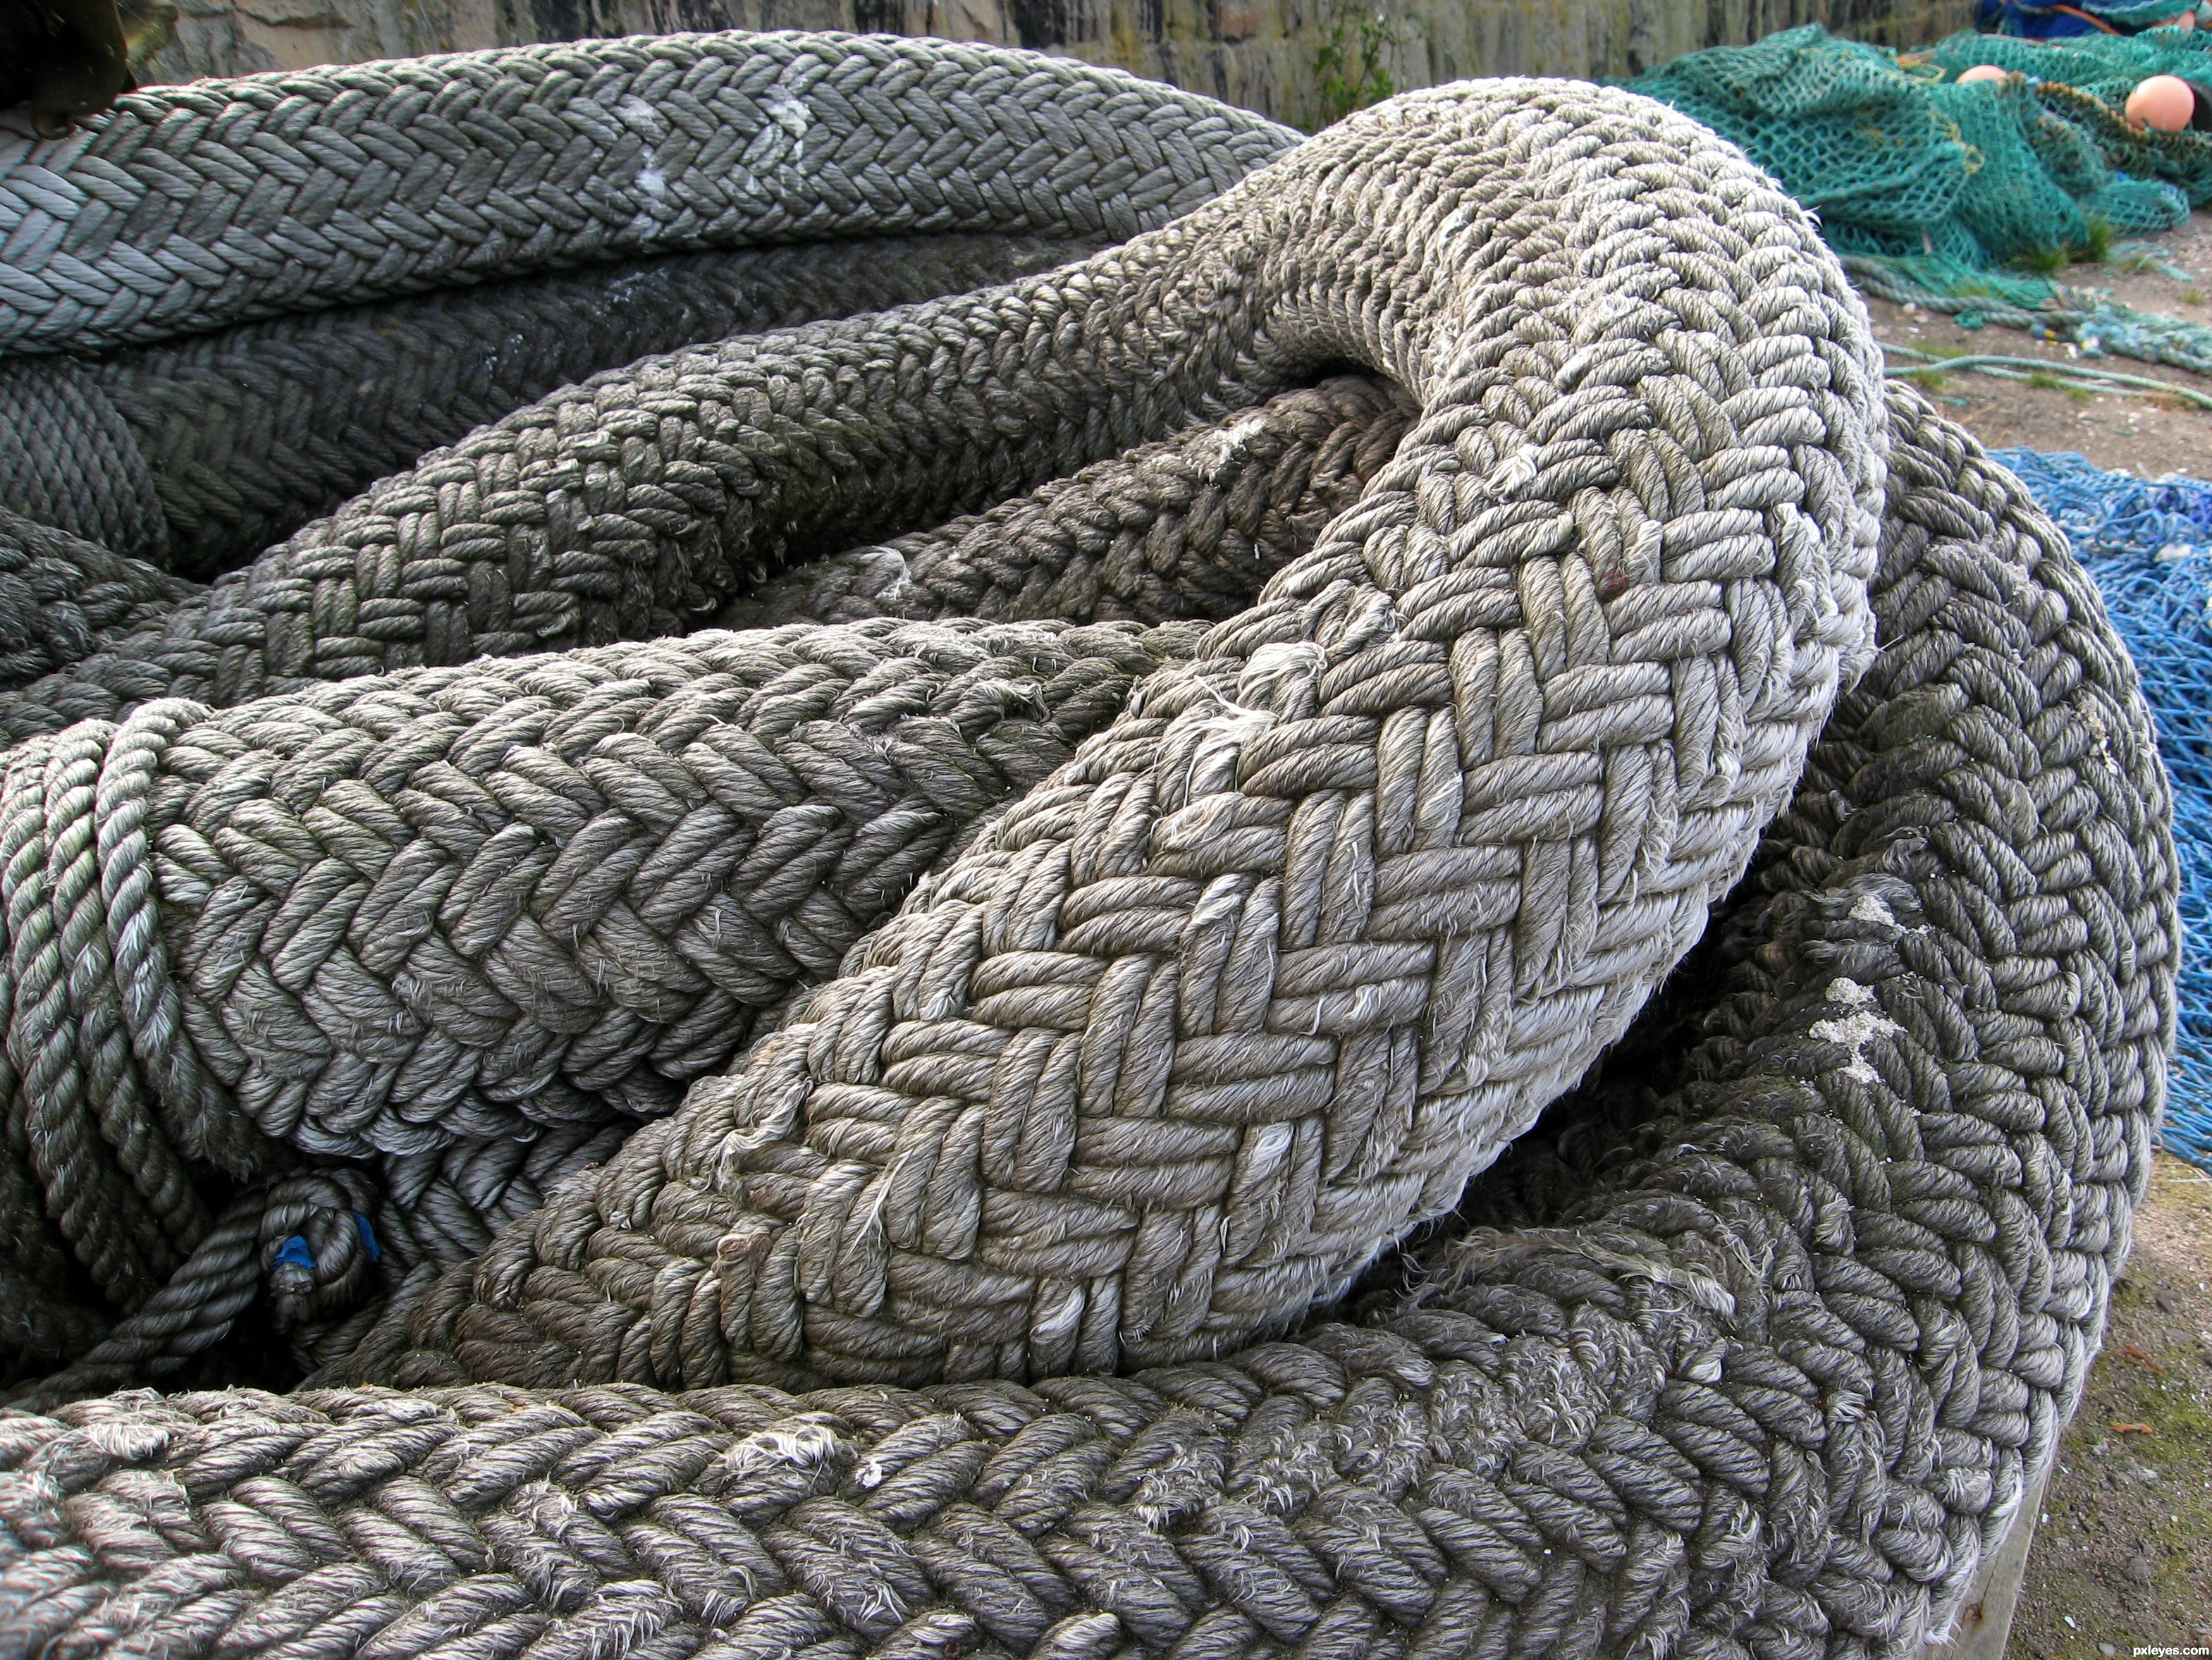 Ship's Rope picture, by jeaniblog for: material closeup